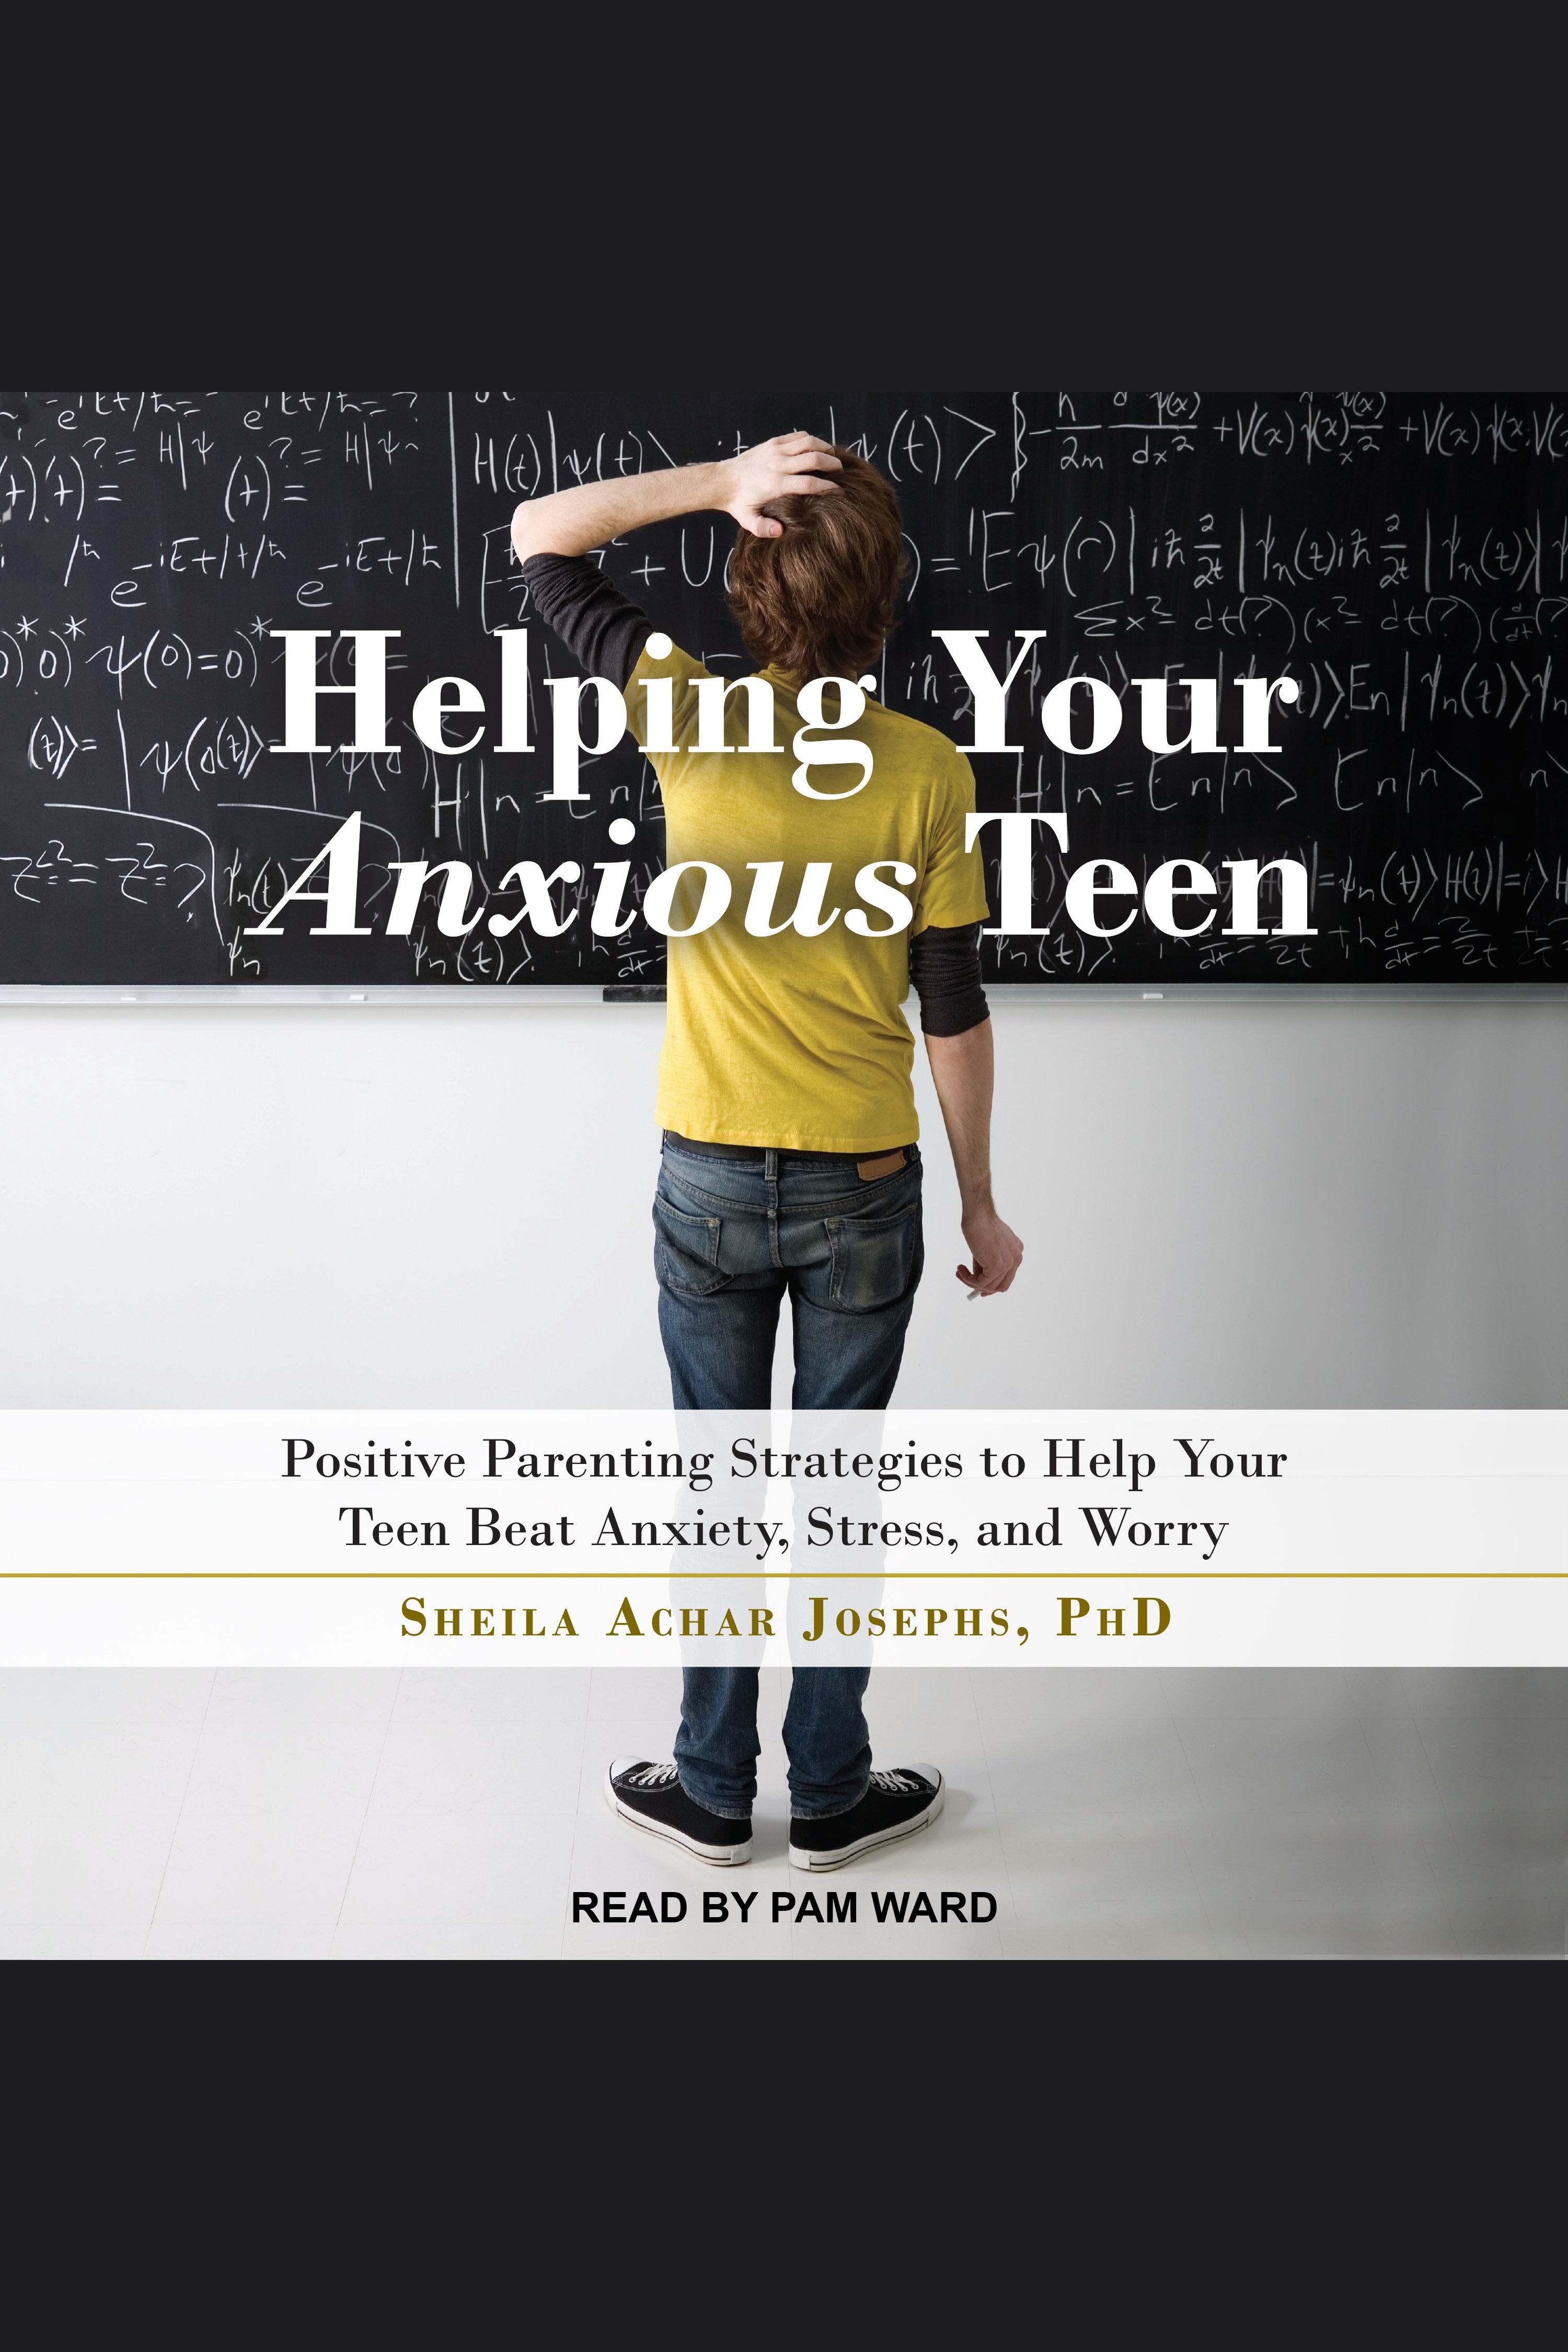 Helping Your Anxious Teen [electronic resource] : Positive Parenting Strategies to Help Your Teen Beat Anxiety, Stress, and Worry